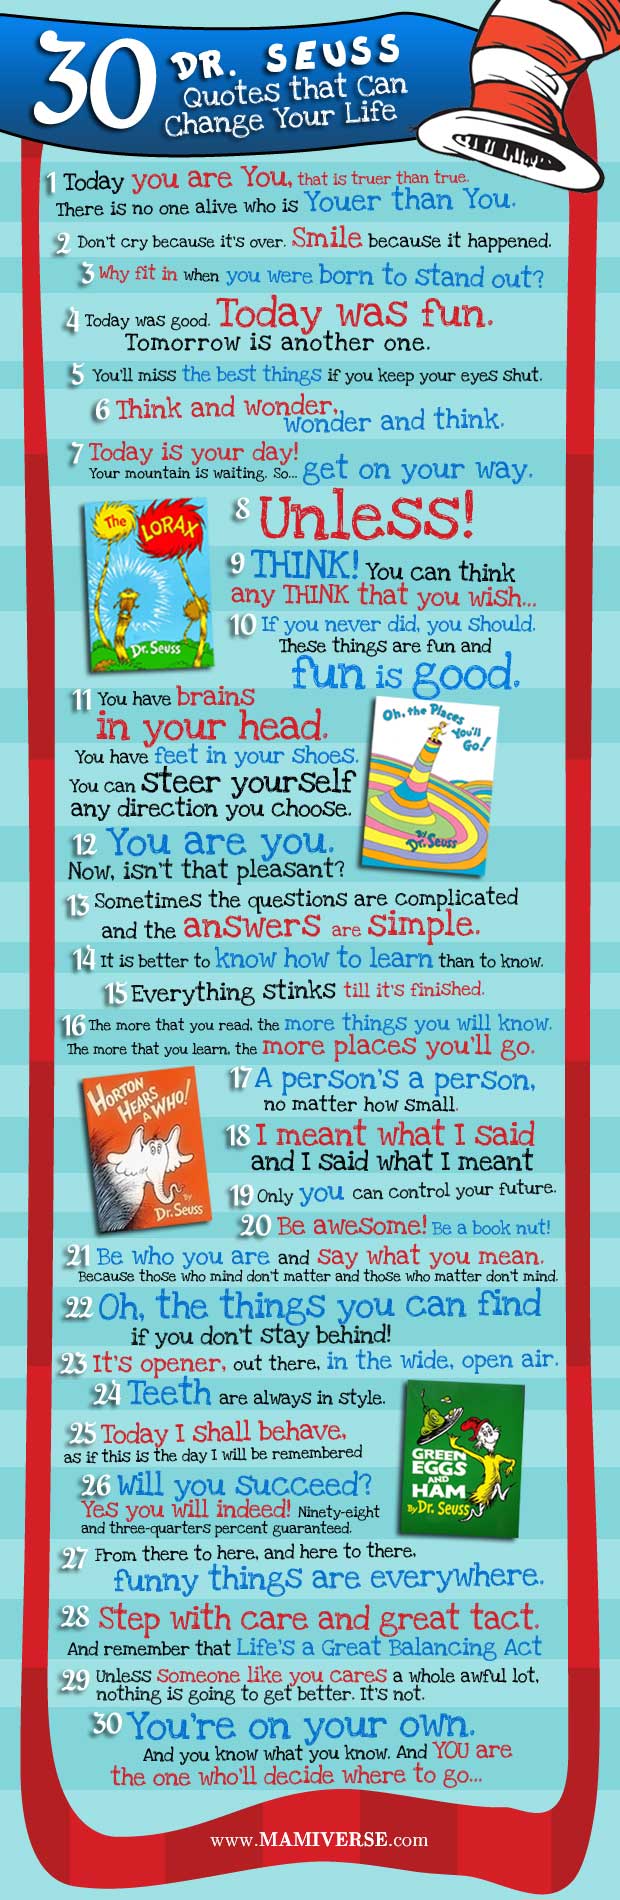 30 Dr. Seuss Quotes that can change your life